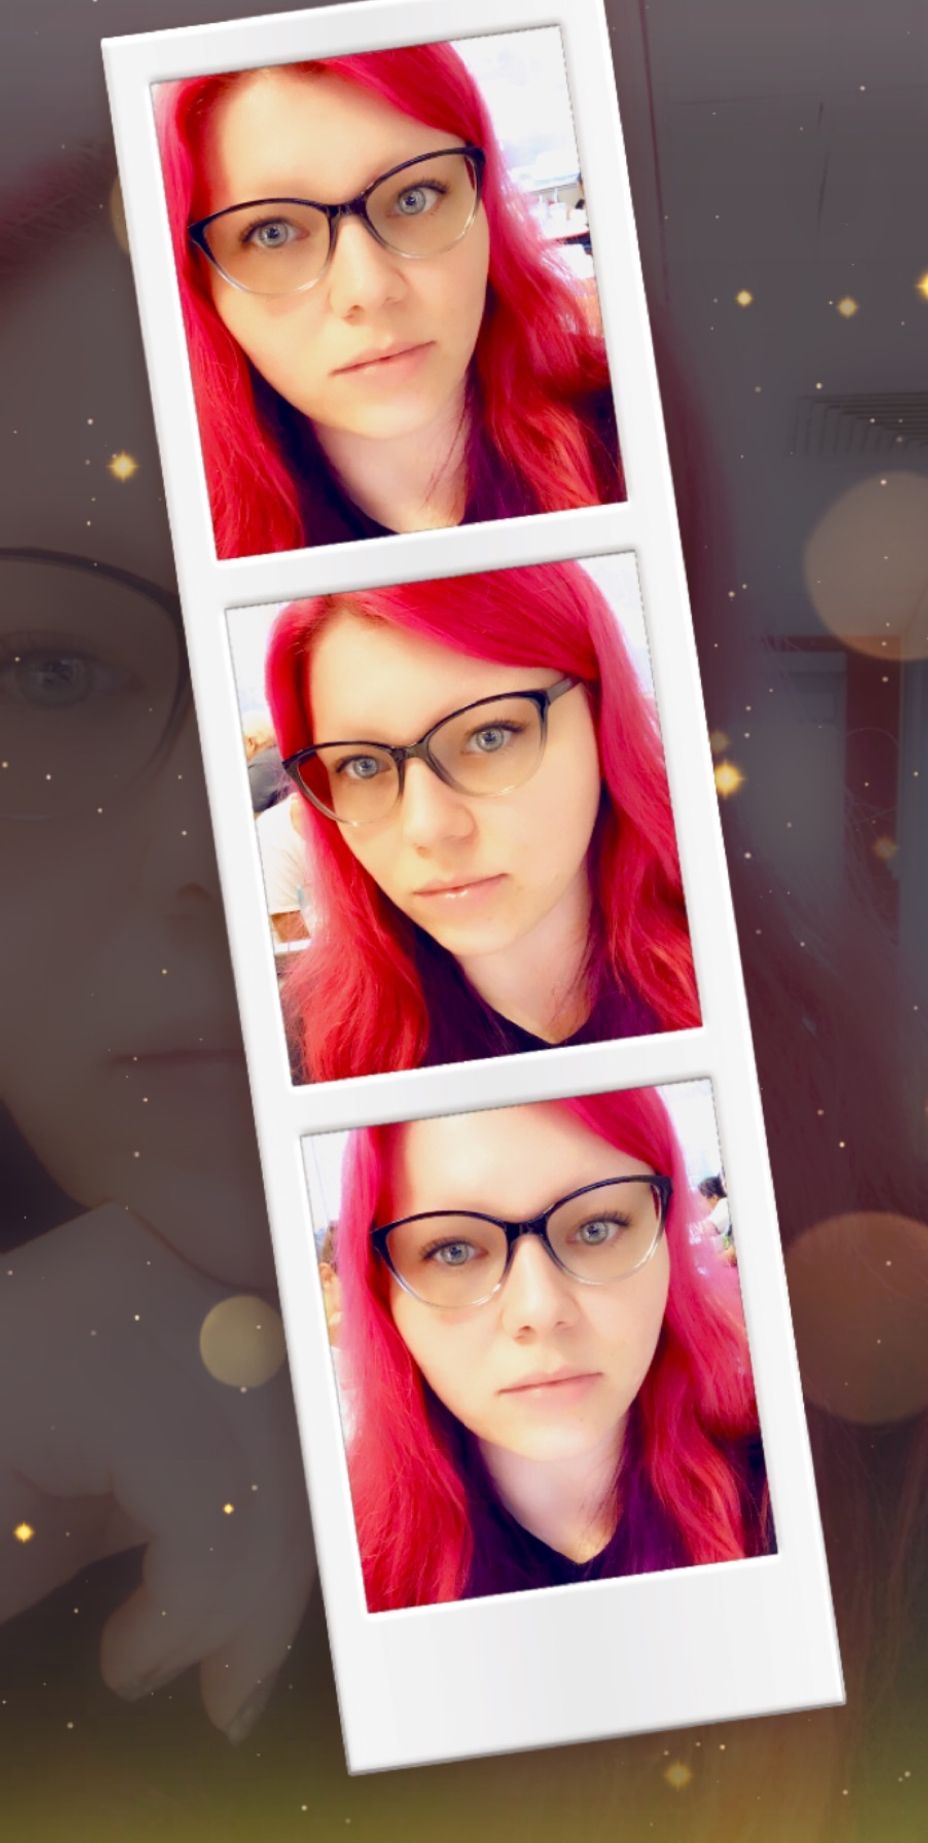 <p>New glasses haven’t posted in a while but I’m still here!</p>